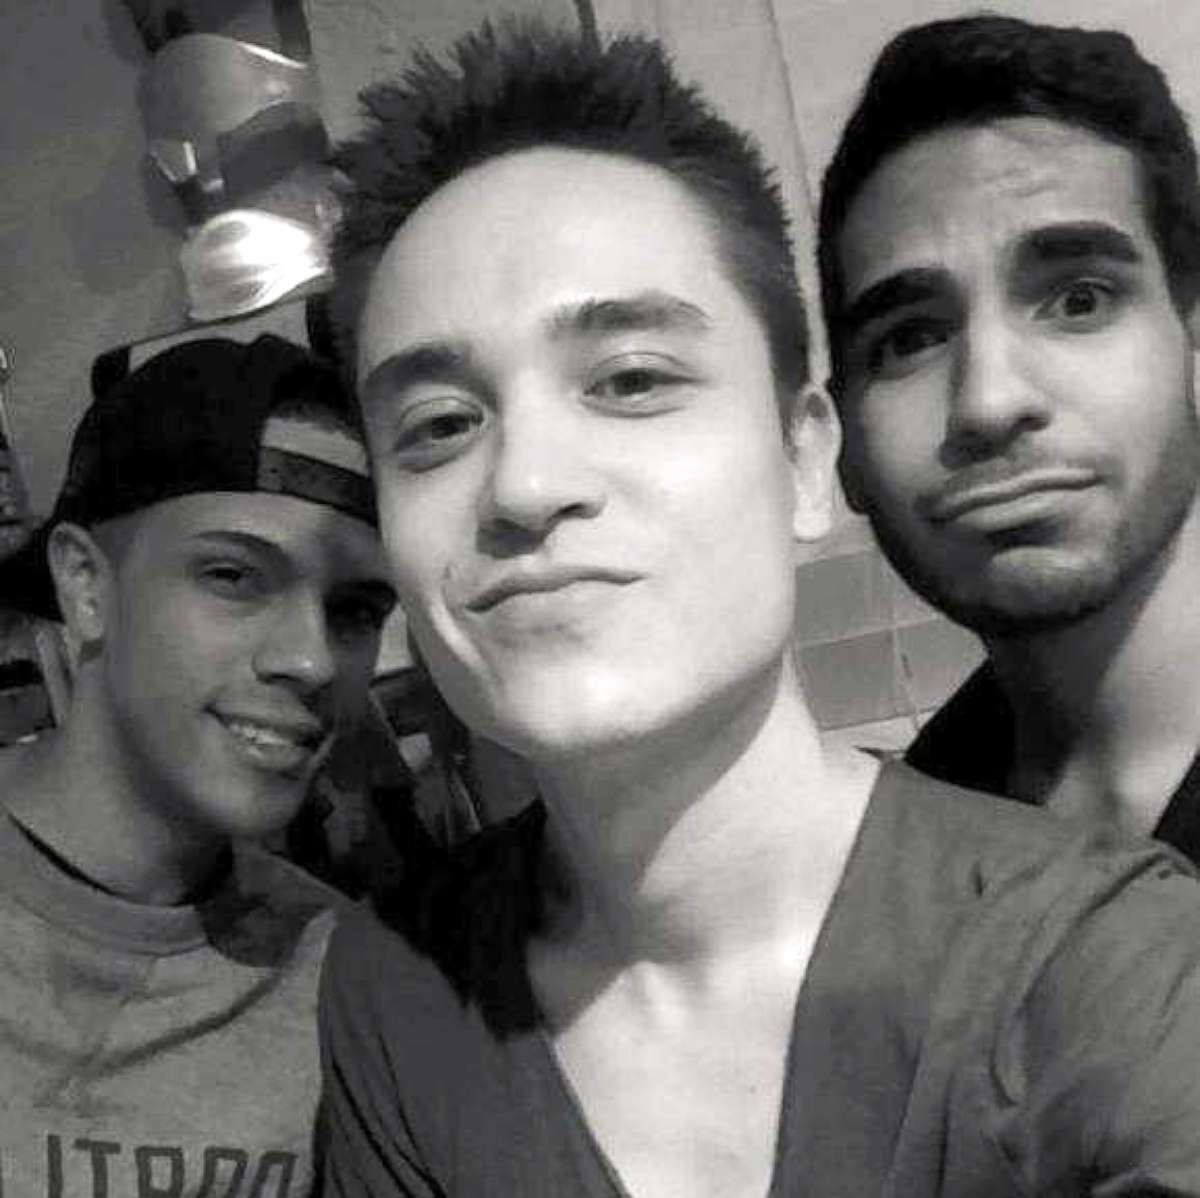 PHOTO: Seen from left to right, Brandon Wolf, Christopher "Drew" Leinonen and Juan Guerrero. Leinonen and Guerrero were killed among 49 men and women, along with 53 who were wounded at Pulse nightclub in Orlando, Fla., on the night of June 12, 2016. 